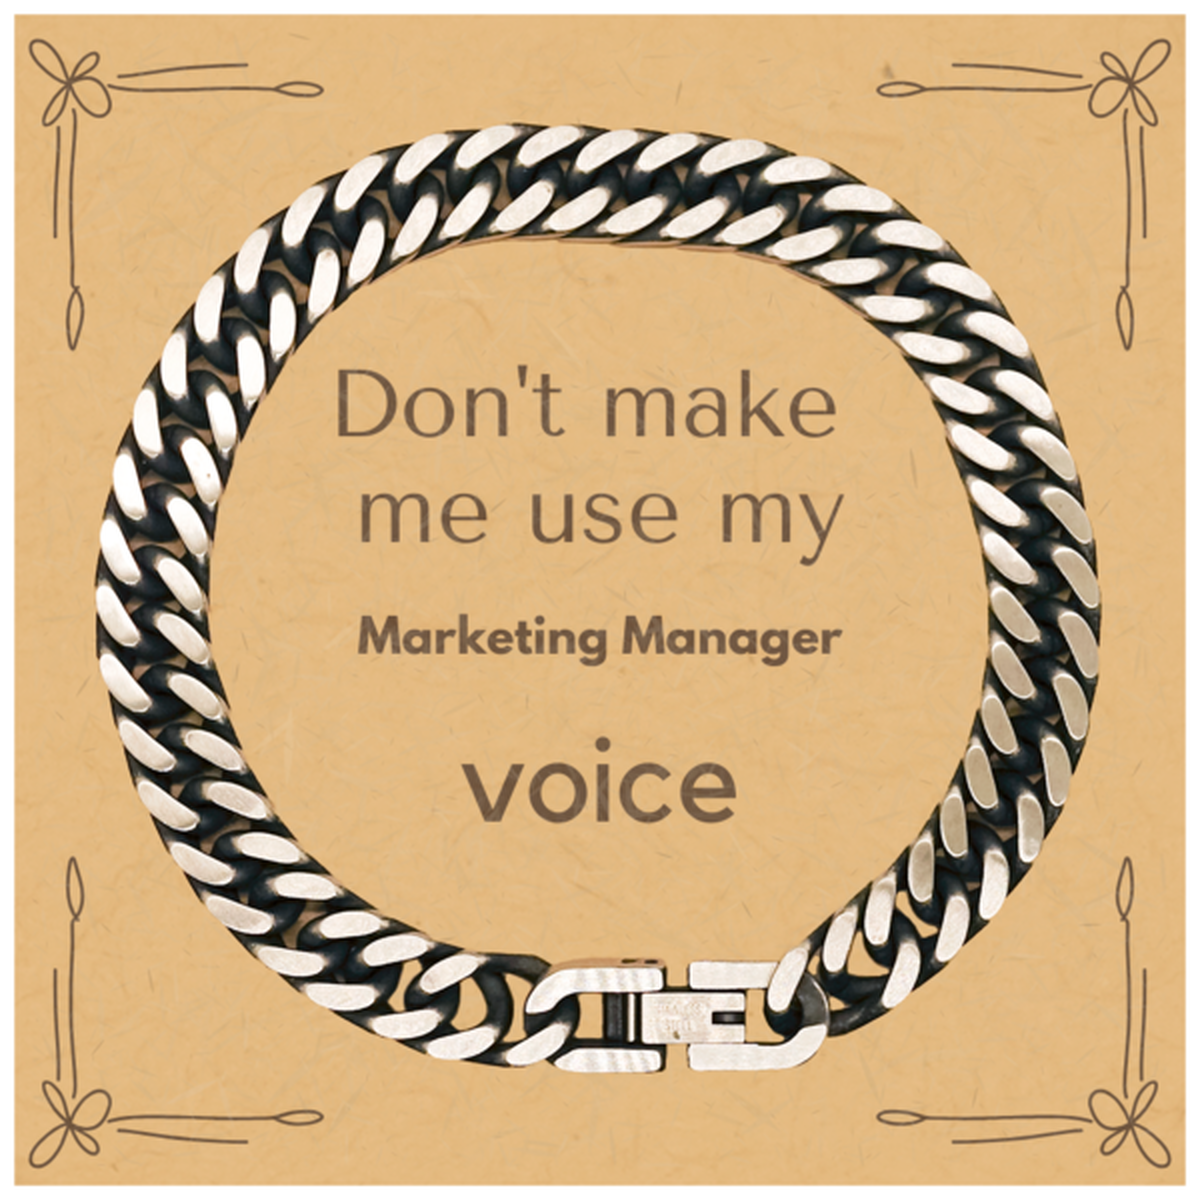 Don't make me use my Marketing Manager voice, Sarcasm Marketing Manager Card Gifts, Christmas Marketing Manager Cuban Link Chain Bracelet Birthday Unique Gifts For Marketing Manager Coworkers, Men, Women, Colleague, Friends